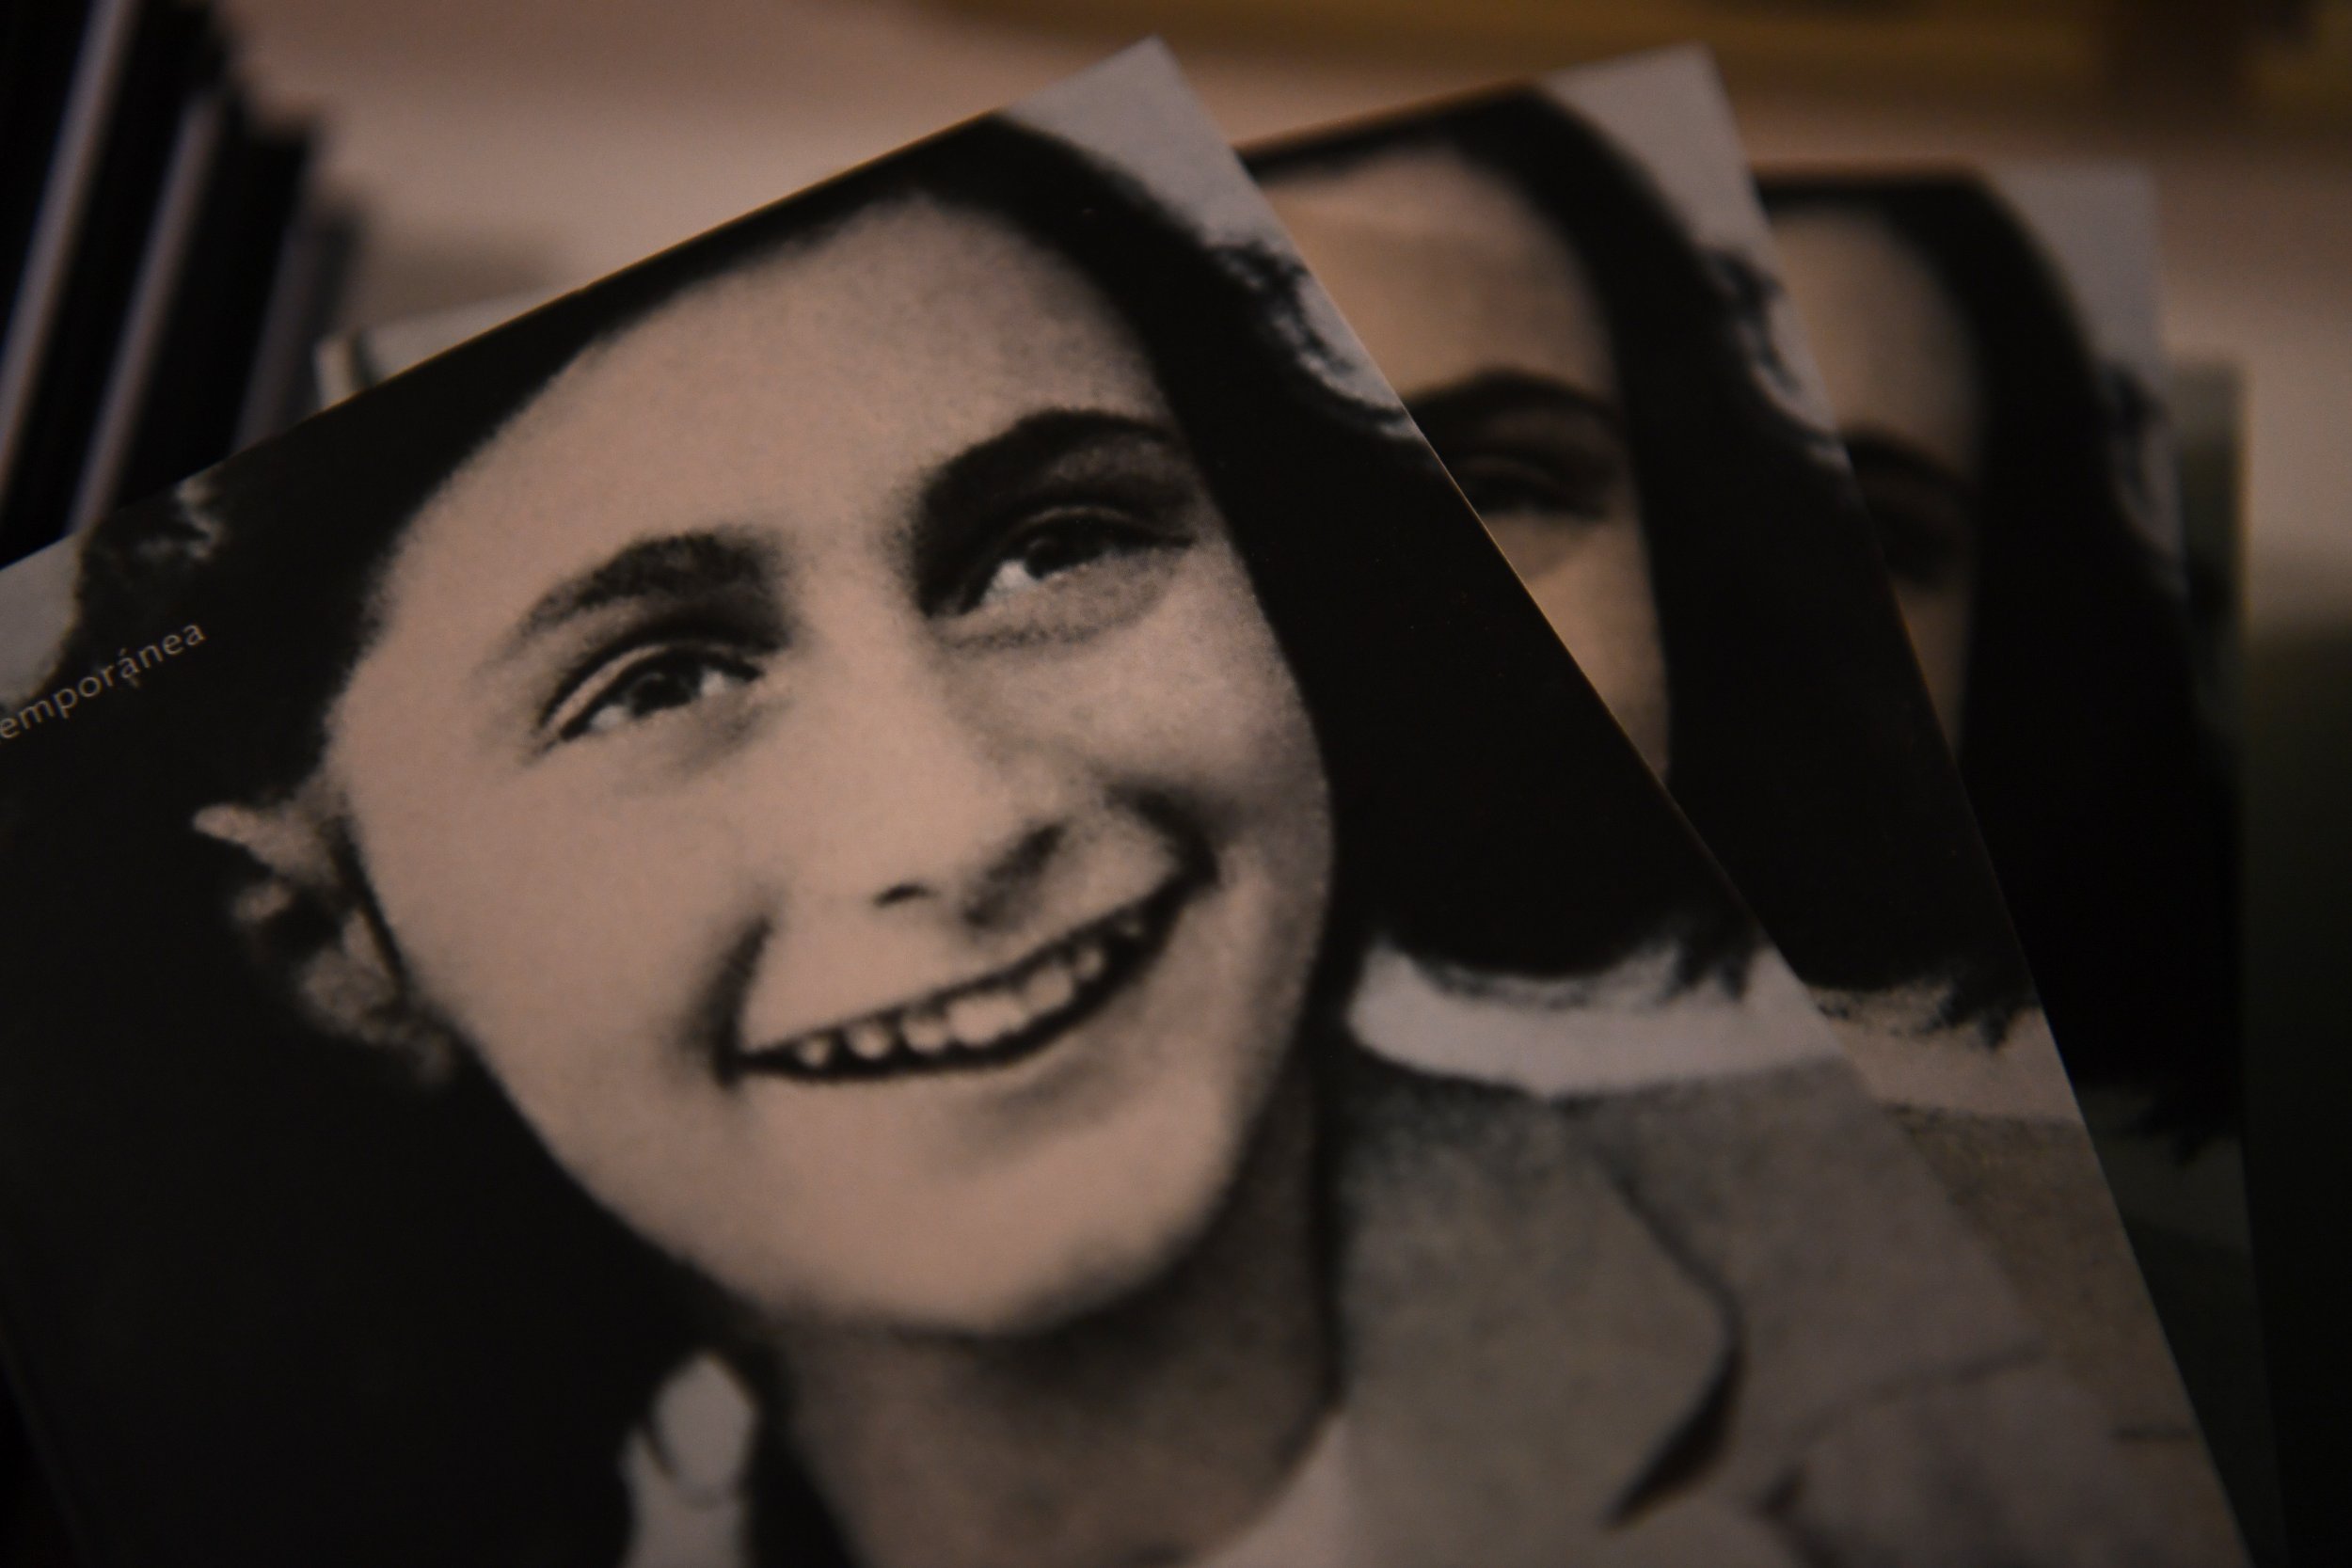 Anne Frank Betrayal Suspect Identified After 77 Years